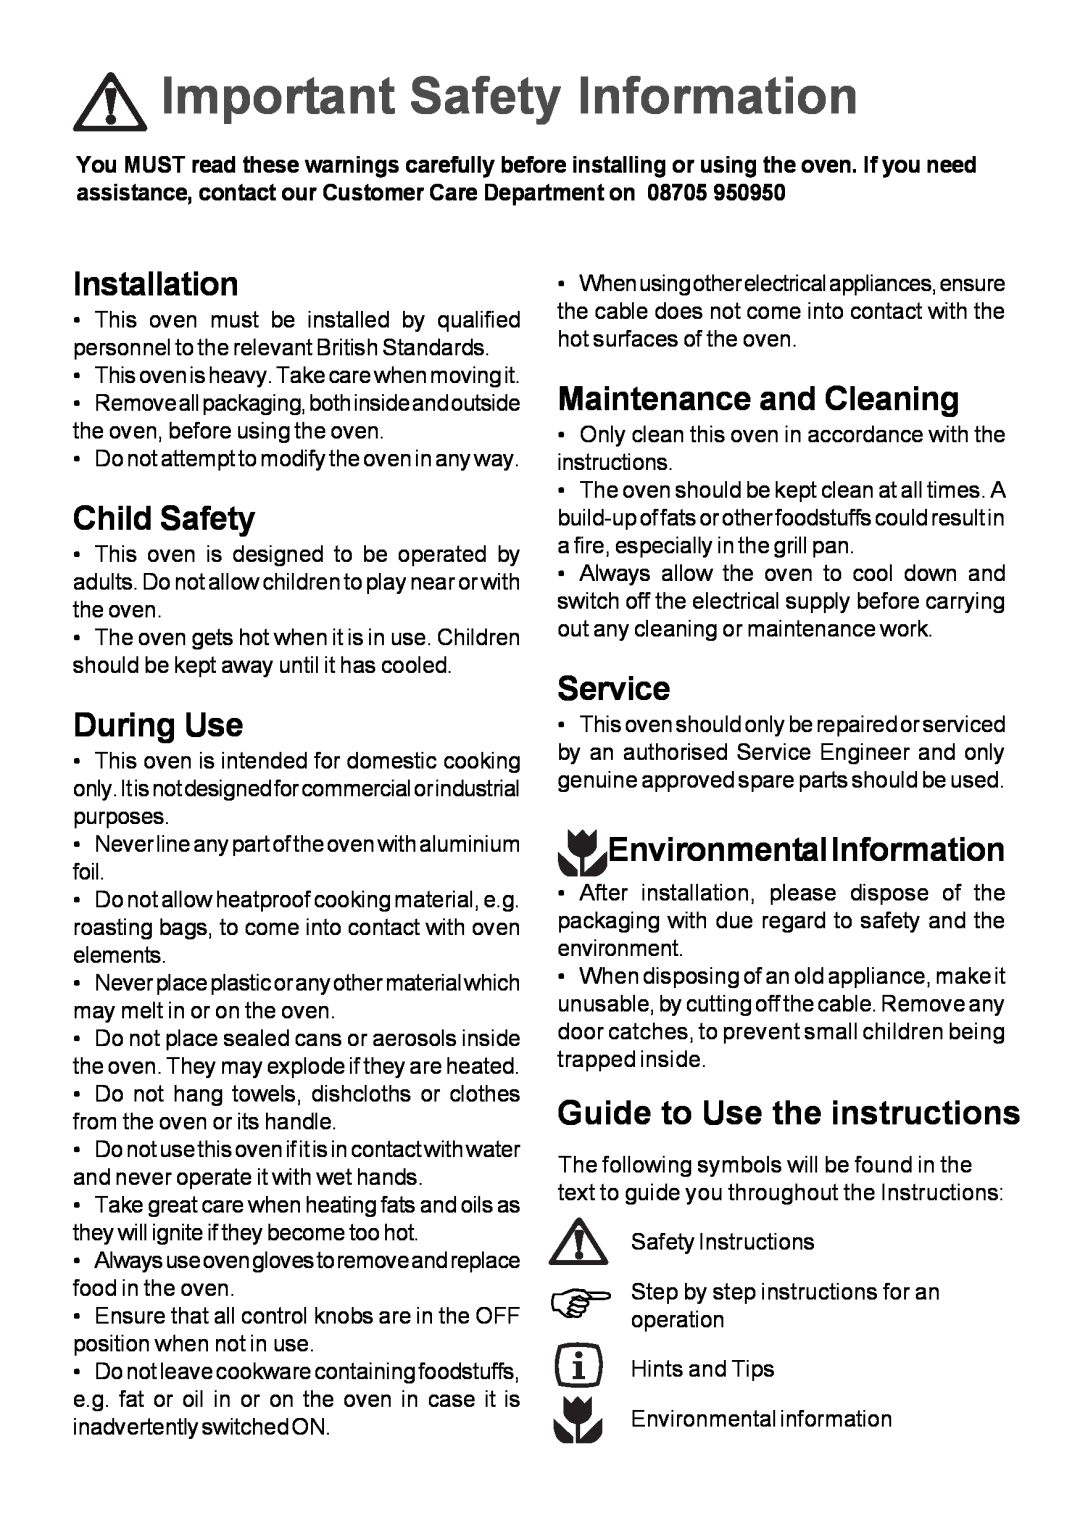 Moffat MSS 600 Important Safety Information, Installation, Child Safety, During Use, Maintenance and Cleaning, Service 